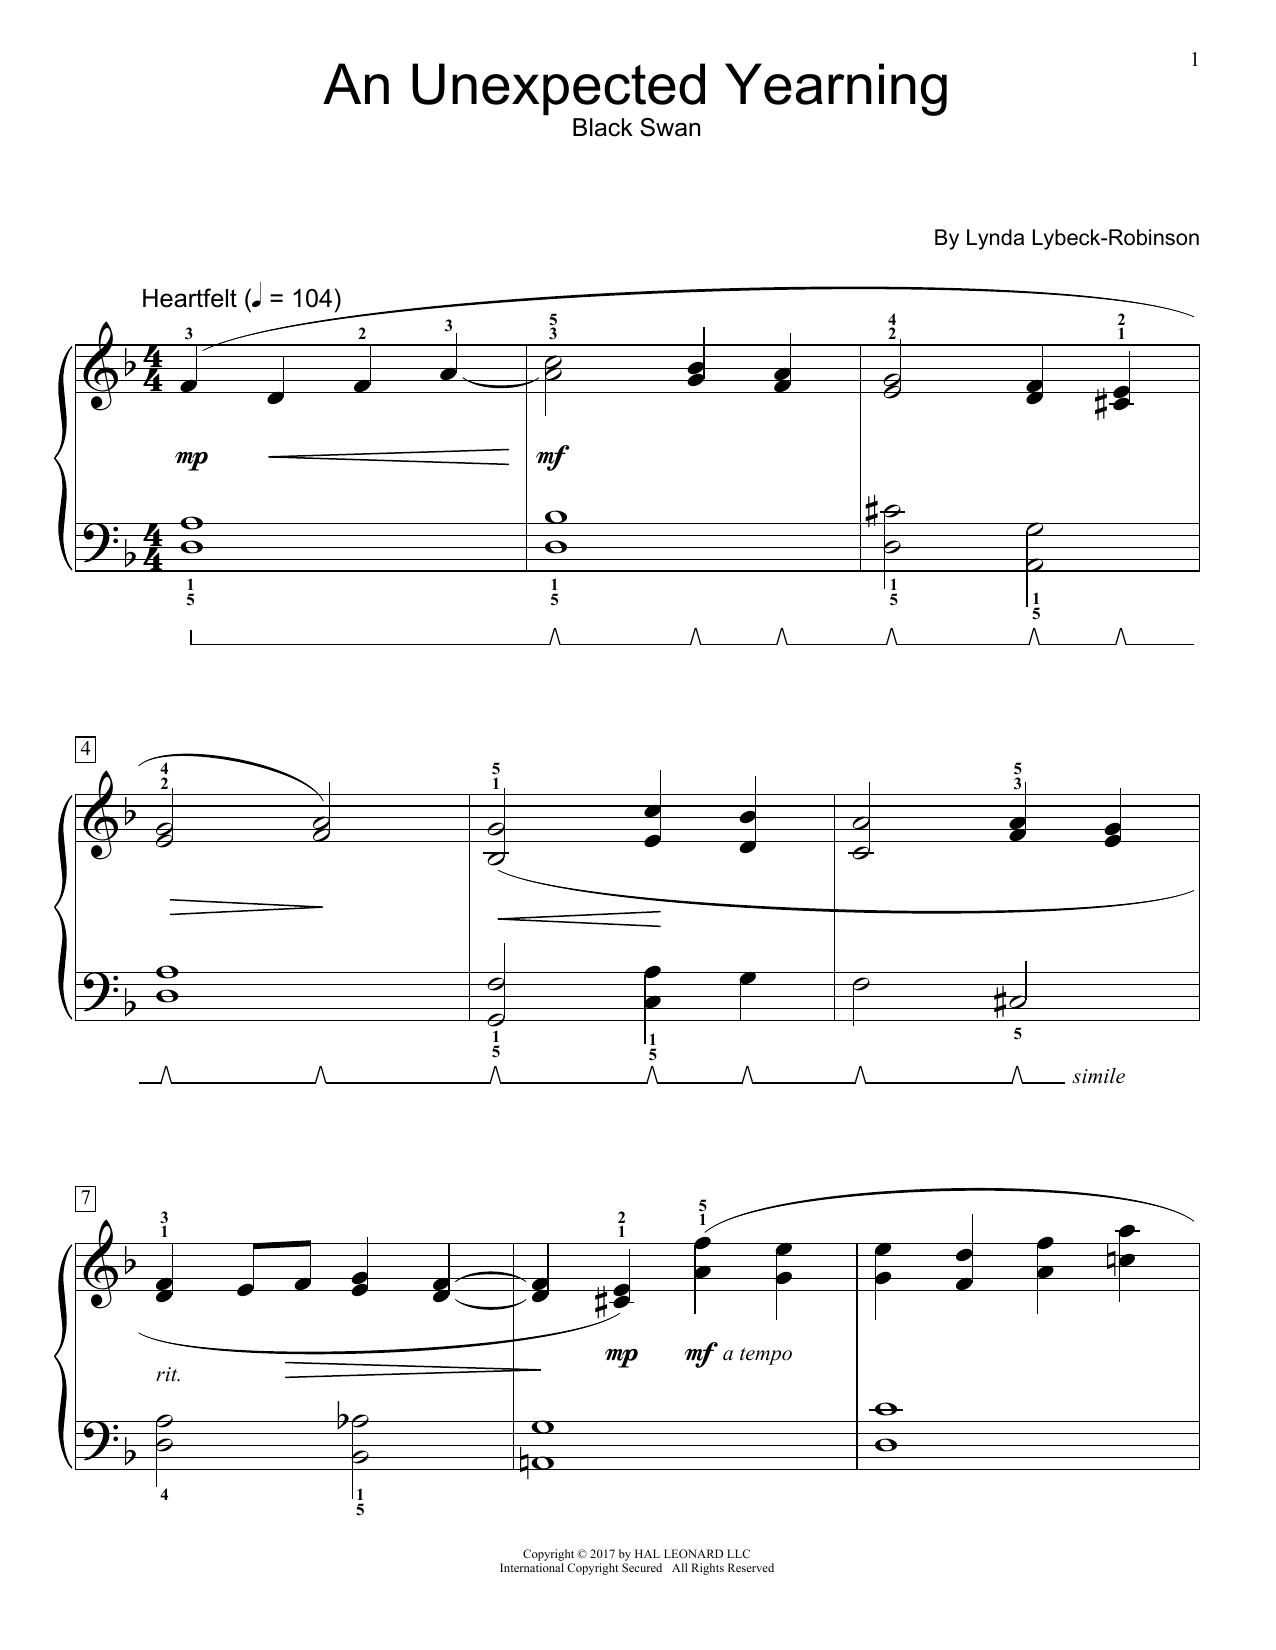 Download Lynda Lybeck-Robinson An Unexpected Yearning Sheet Music